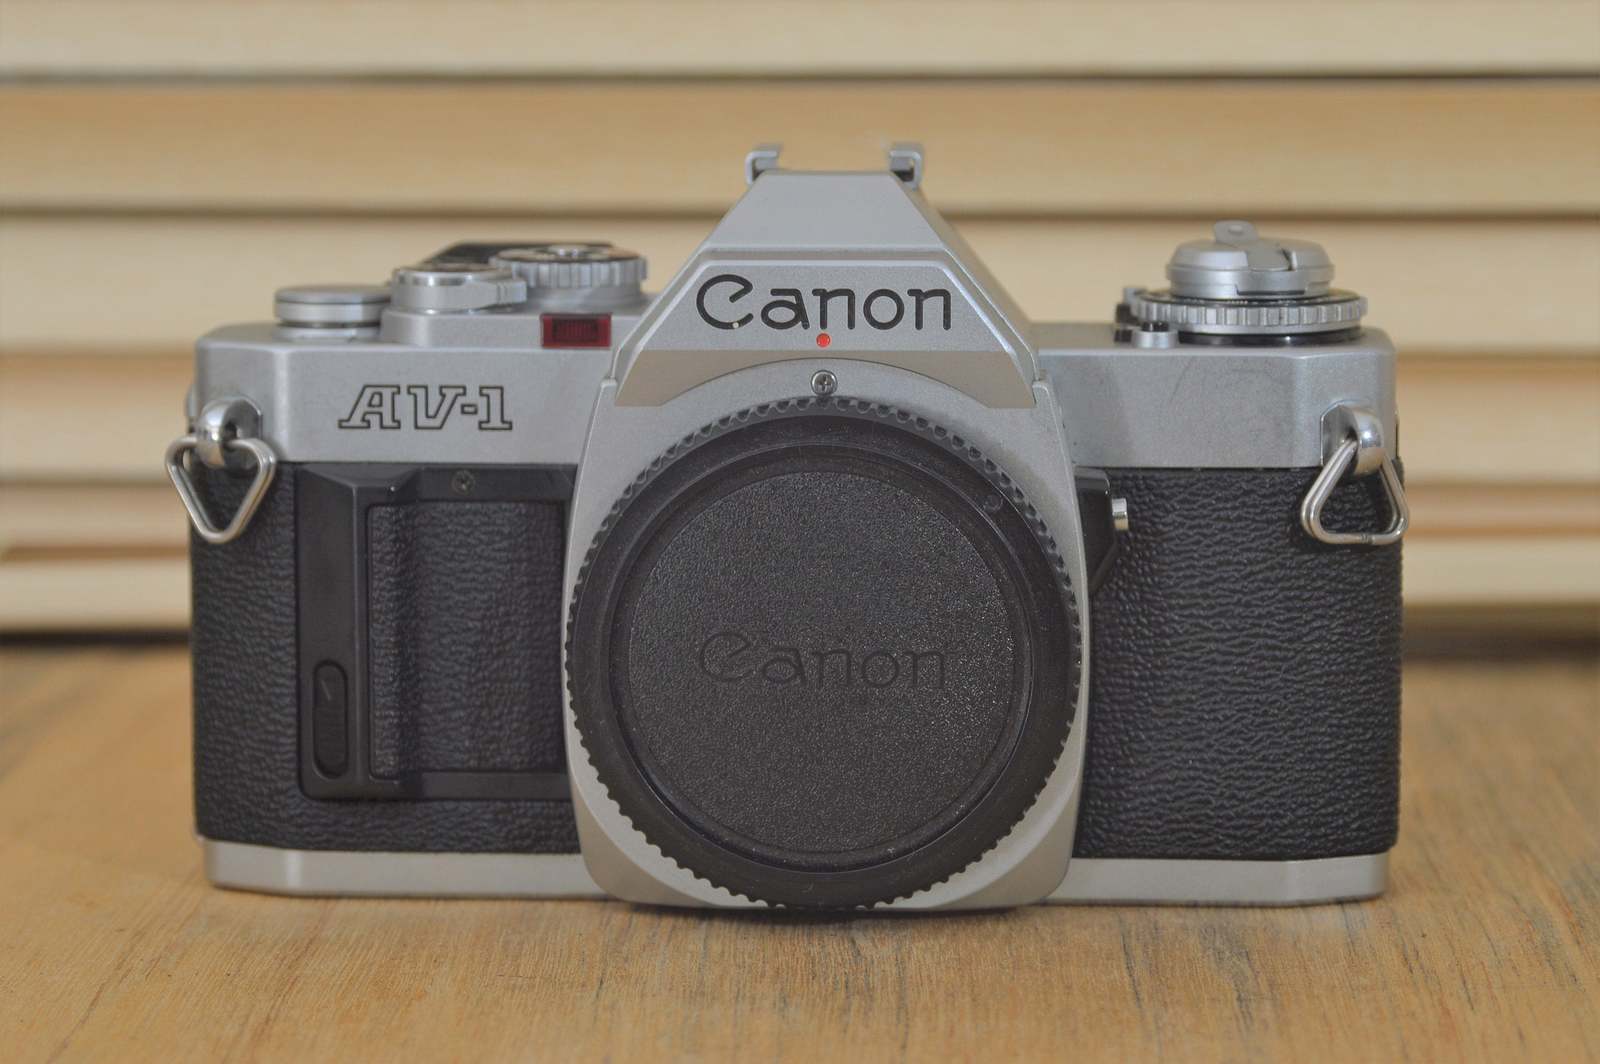 Primary image for Beautiful Canon AV1 (body only). Lovely condition. These are perfect for beginne